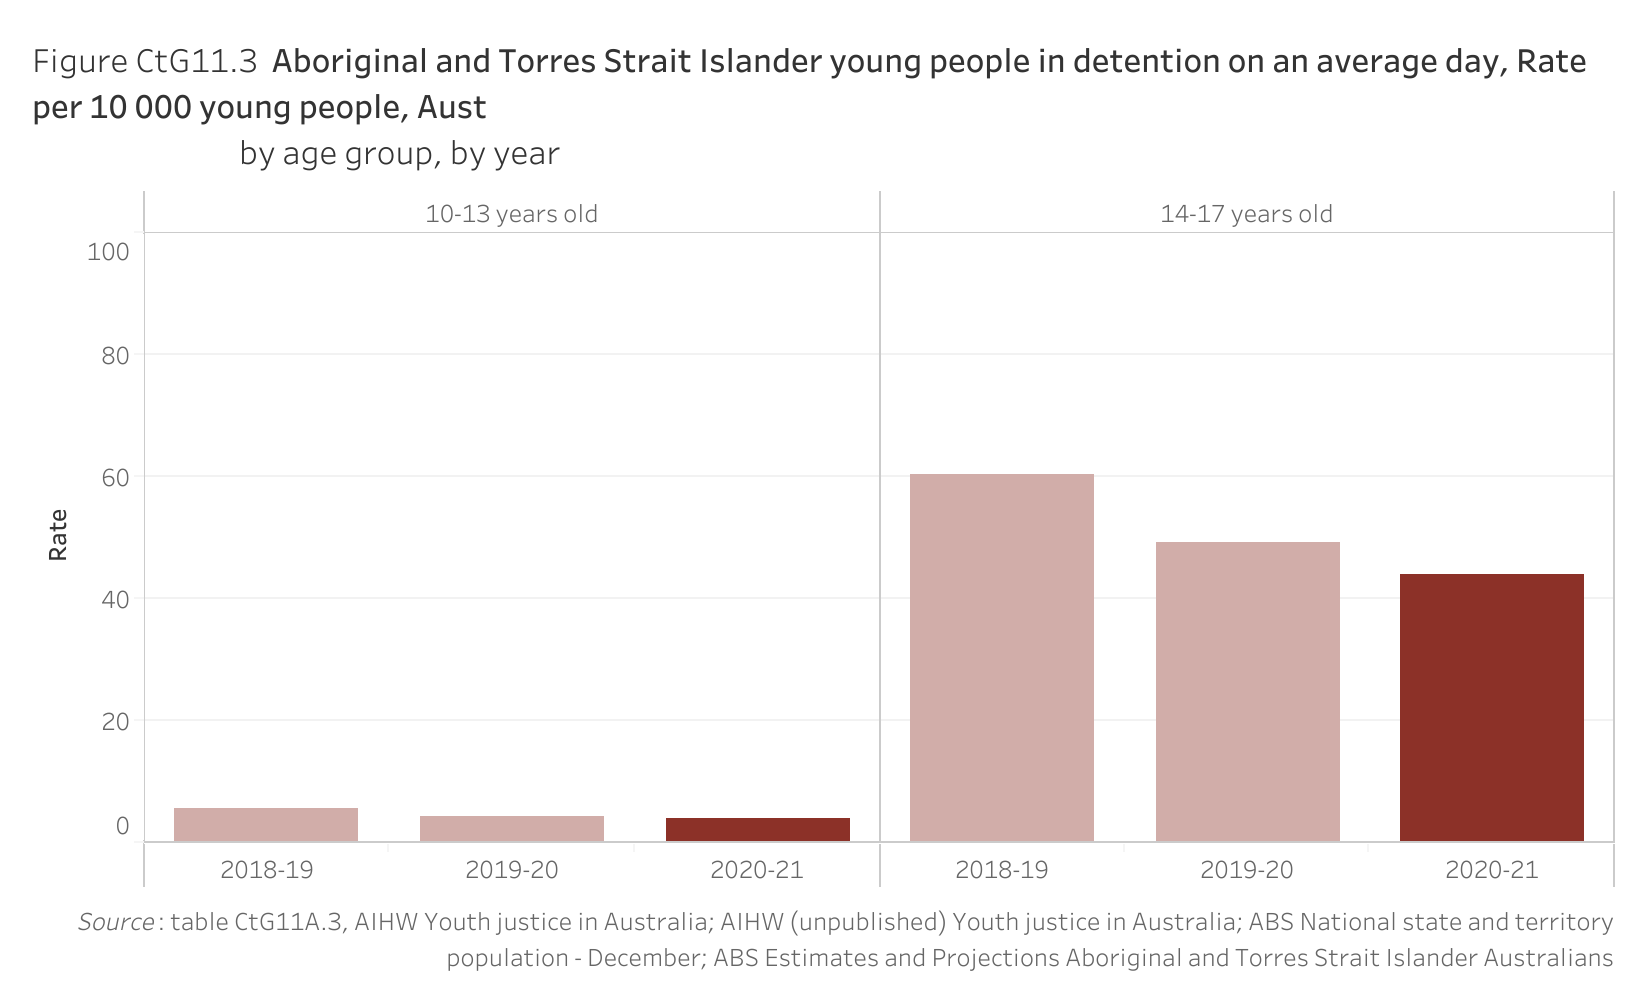 Figure CtG11.3. Bar chart showing the rate of Aboriginal and Torres Strait Islander young people in detention per 10 000 young people on an average day in Australia, by age group and by year. Data table of figure CtG11.3 is below.